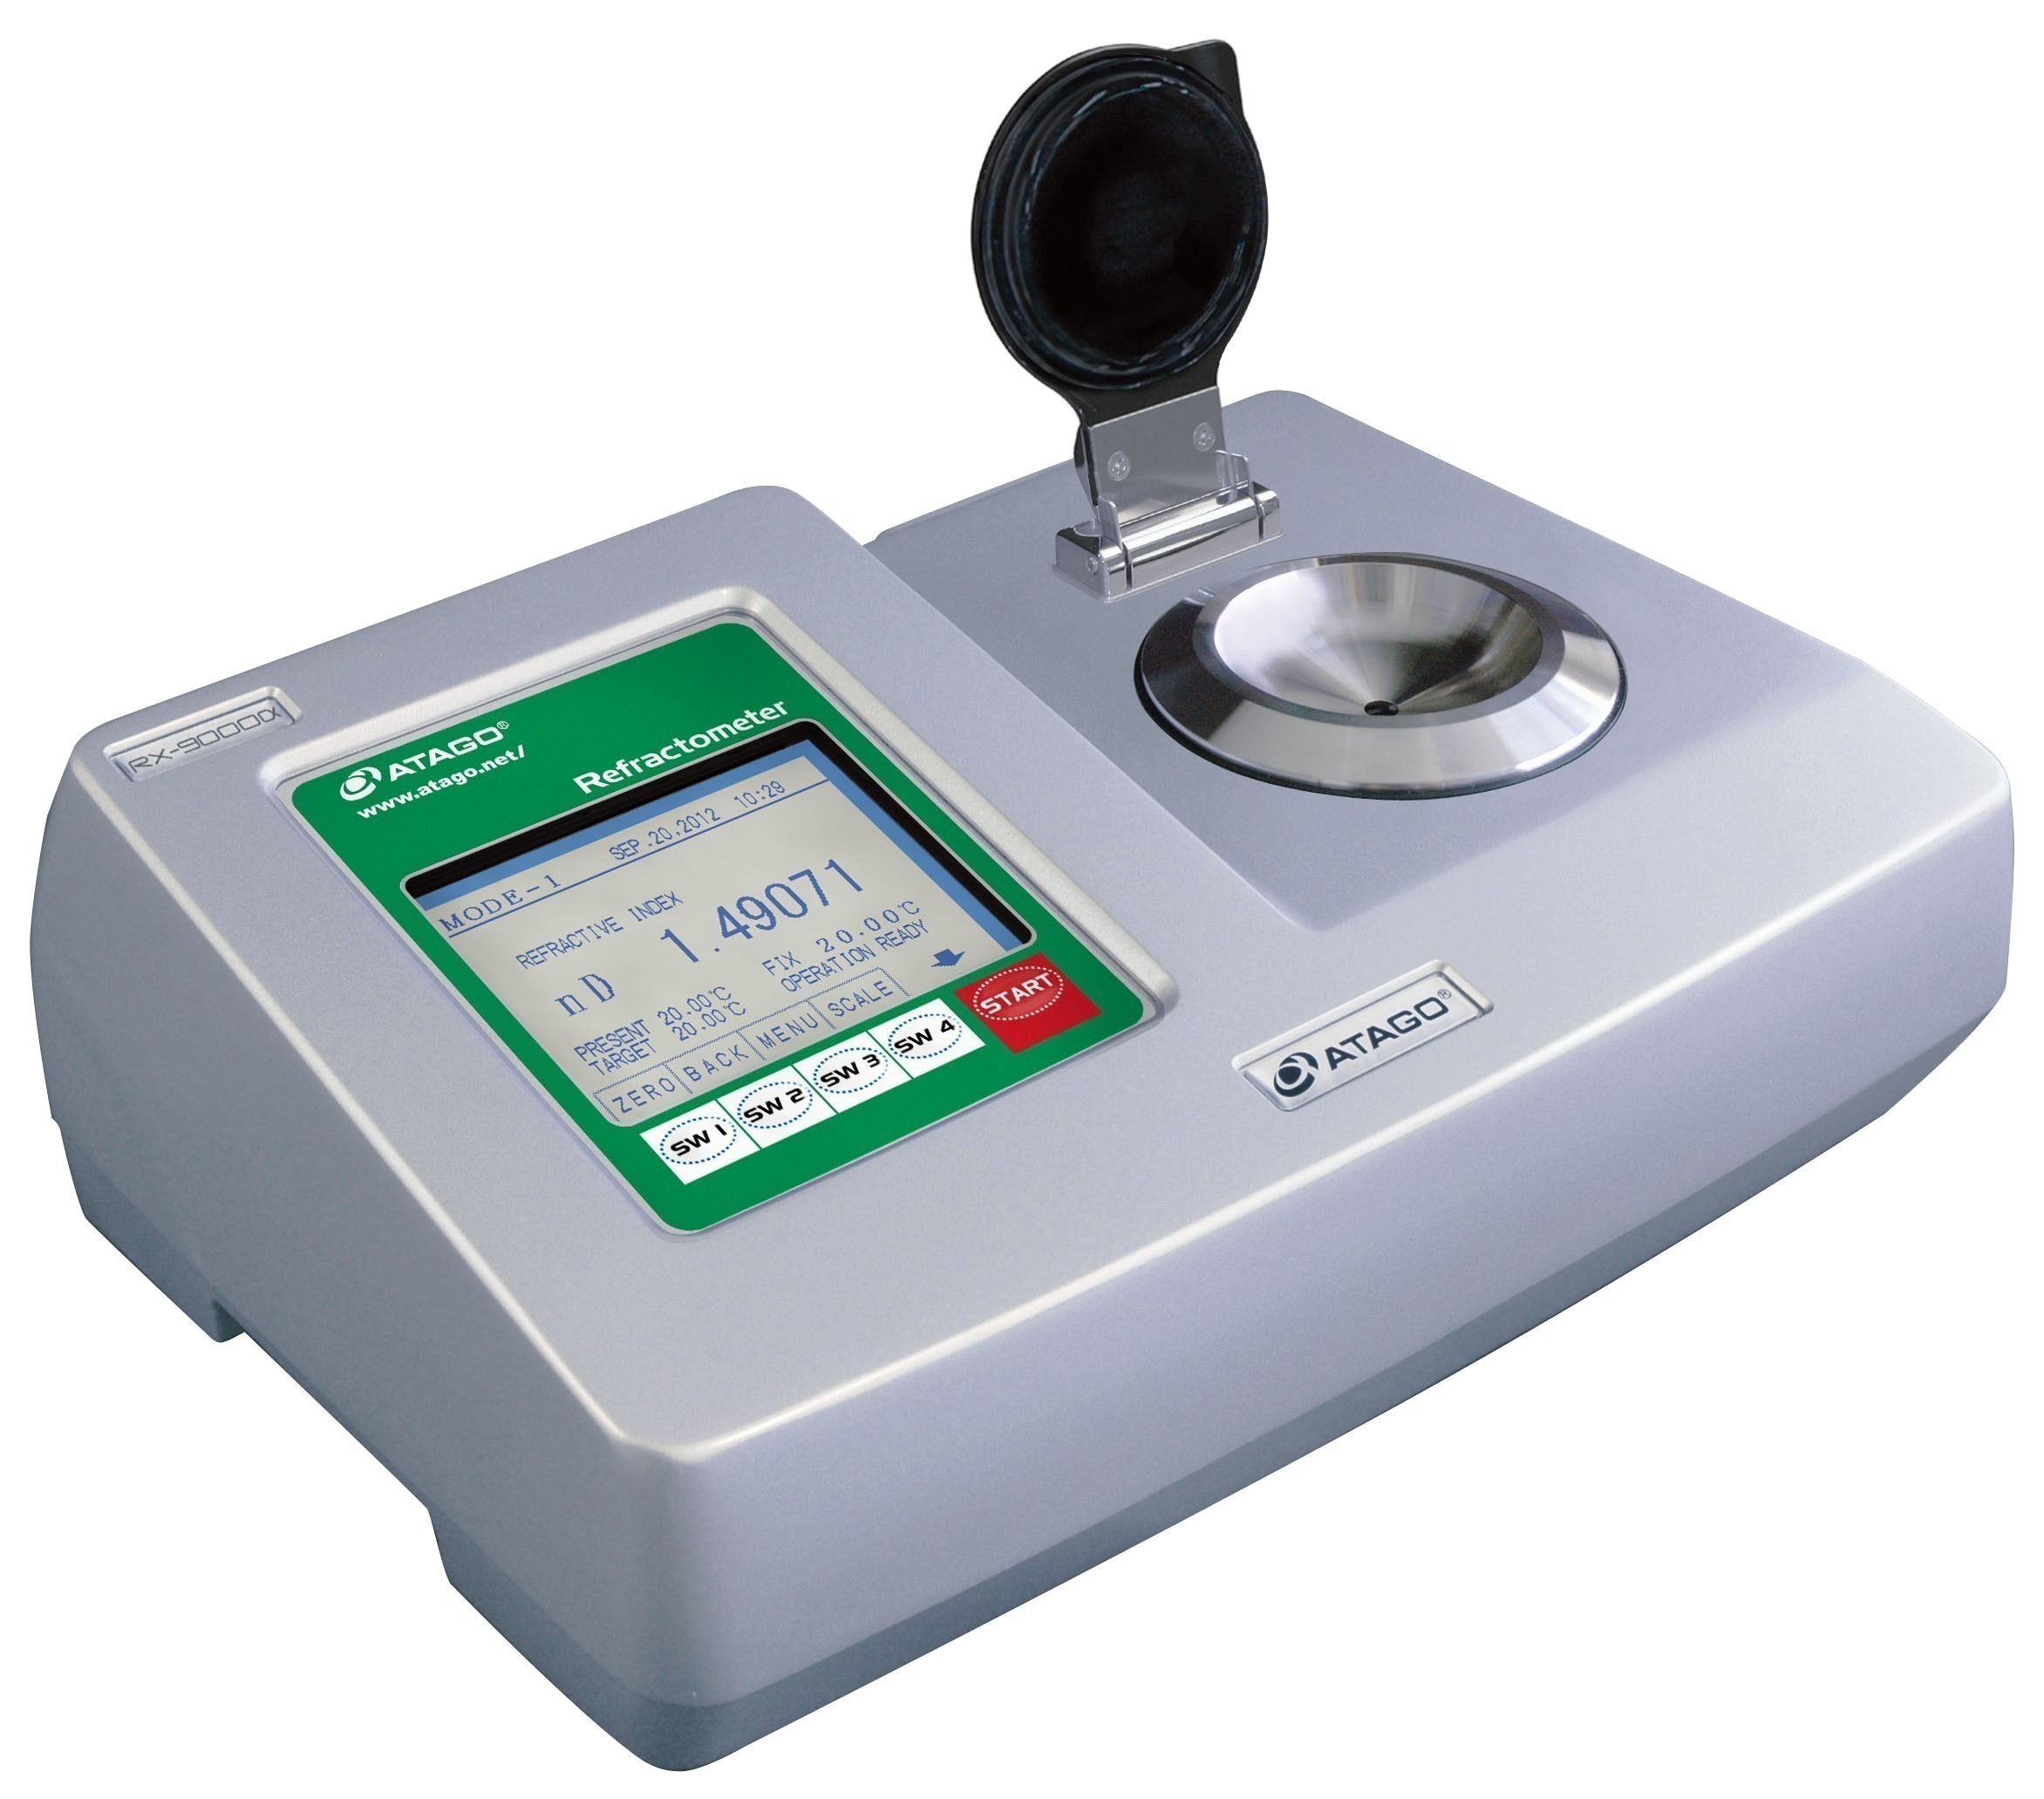 Atago 3263 RX-9000a Automatic Bench-Top Digital Refractometers, Refractive index (nD) : 1.32500 to 1.70000 Measurement Range